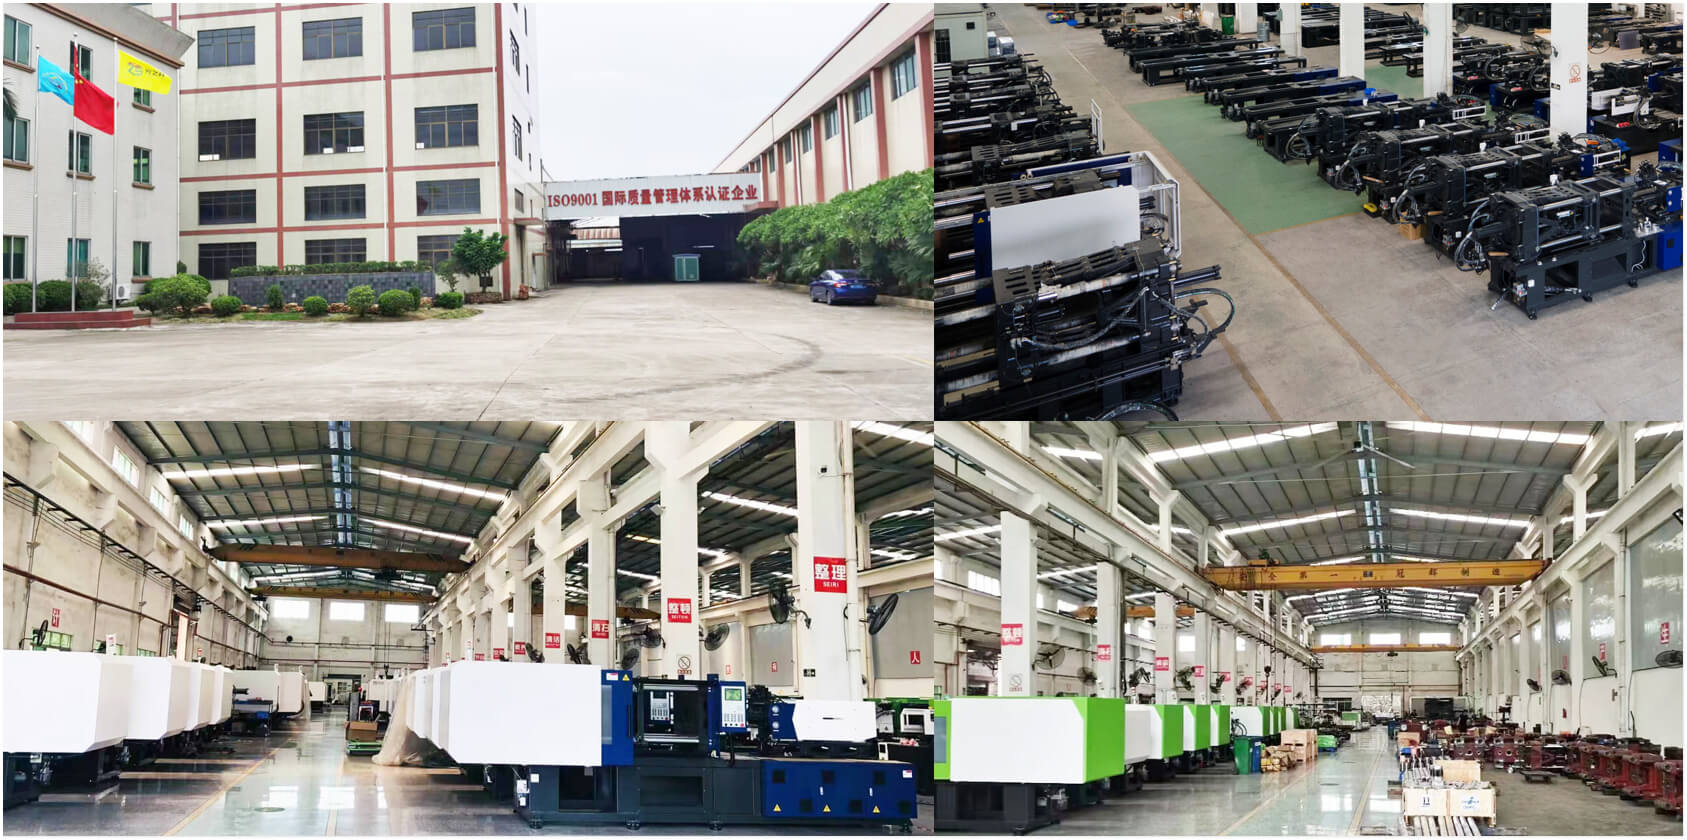 Professional Plastic injection blow molding machines manufacturer & supplier in China